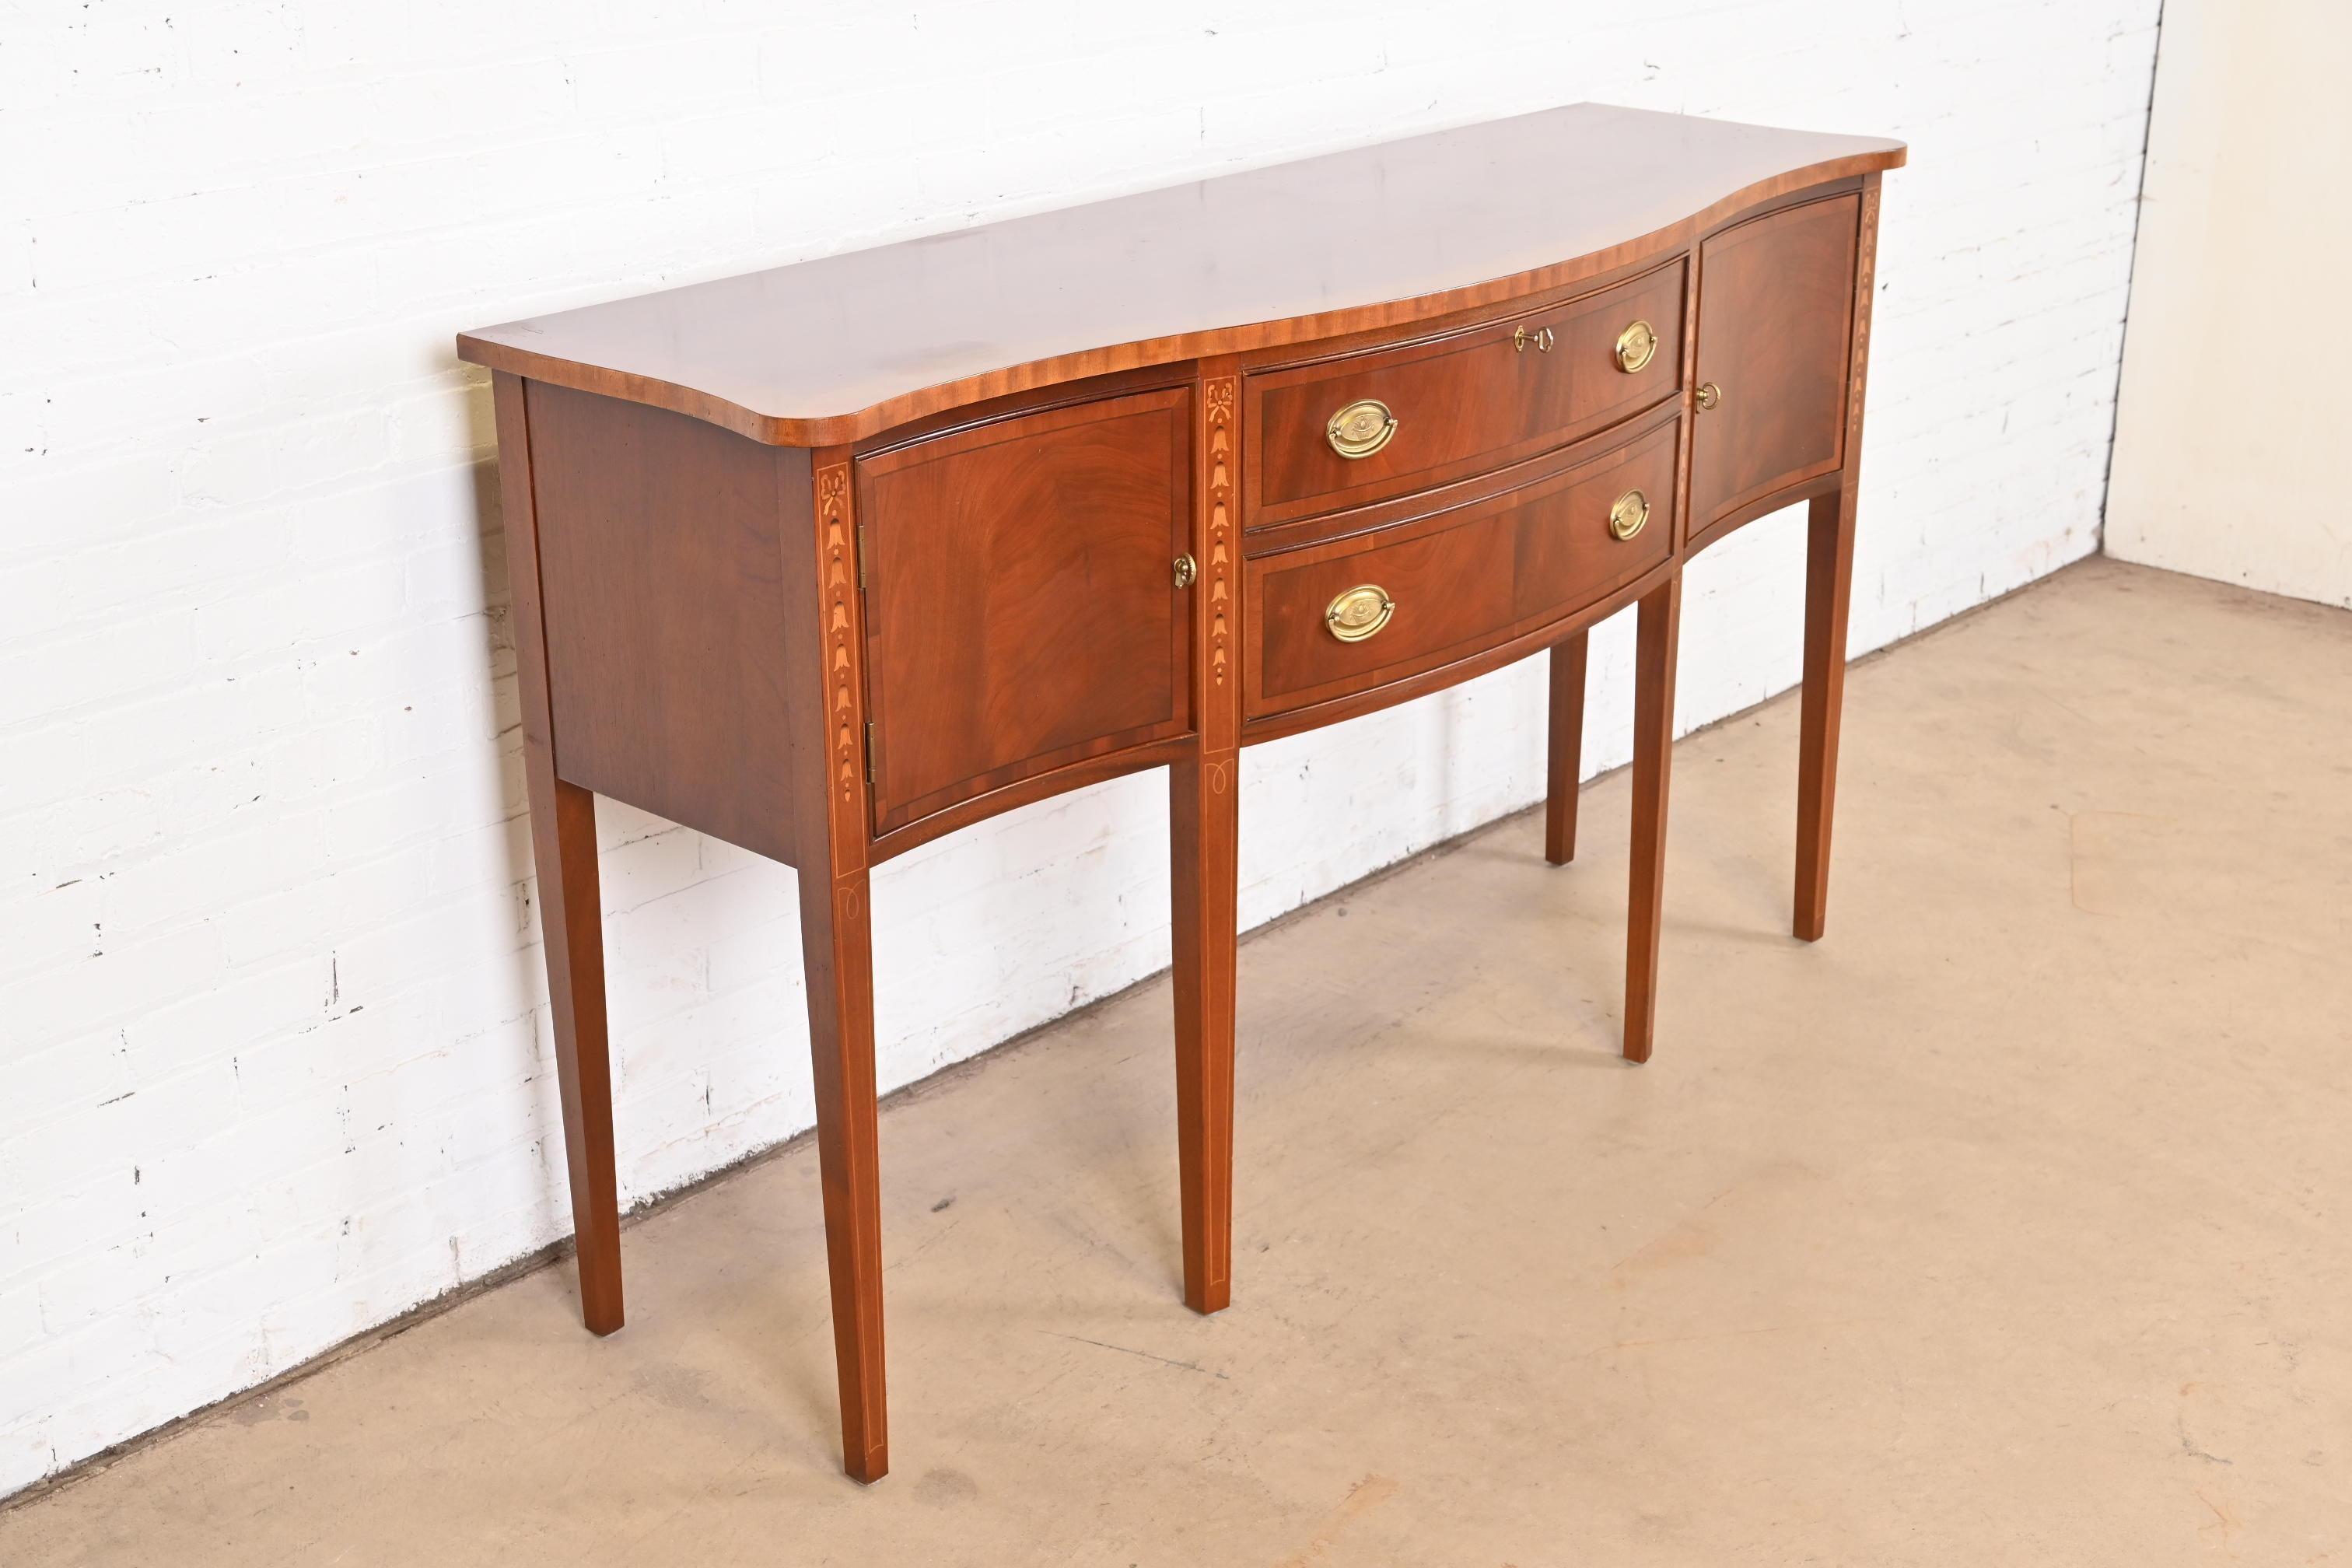 Hepplewhite Inlaid Mahogany Serpentine Front Sideboard Buffet or Credenza 1